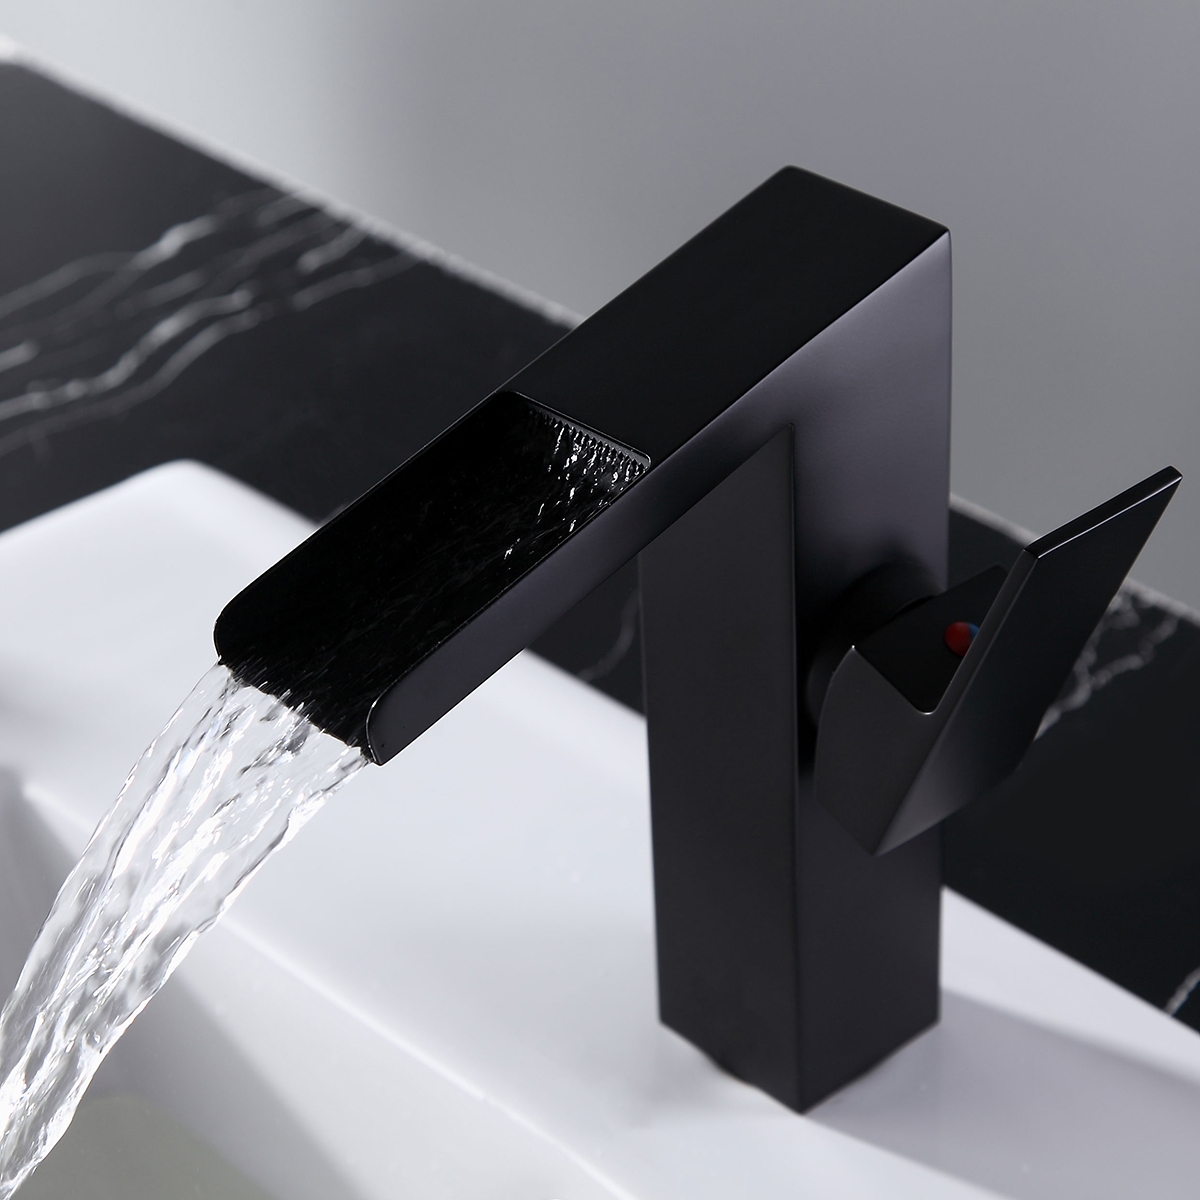 Quad Square Slanted Single Hole 1-Handle Waterfall Faucet Solid Brass for Bathroom Sink in Matte Black